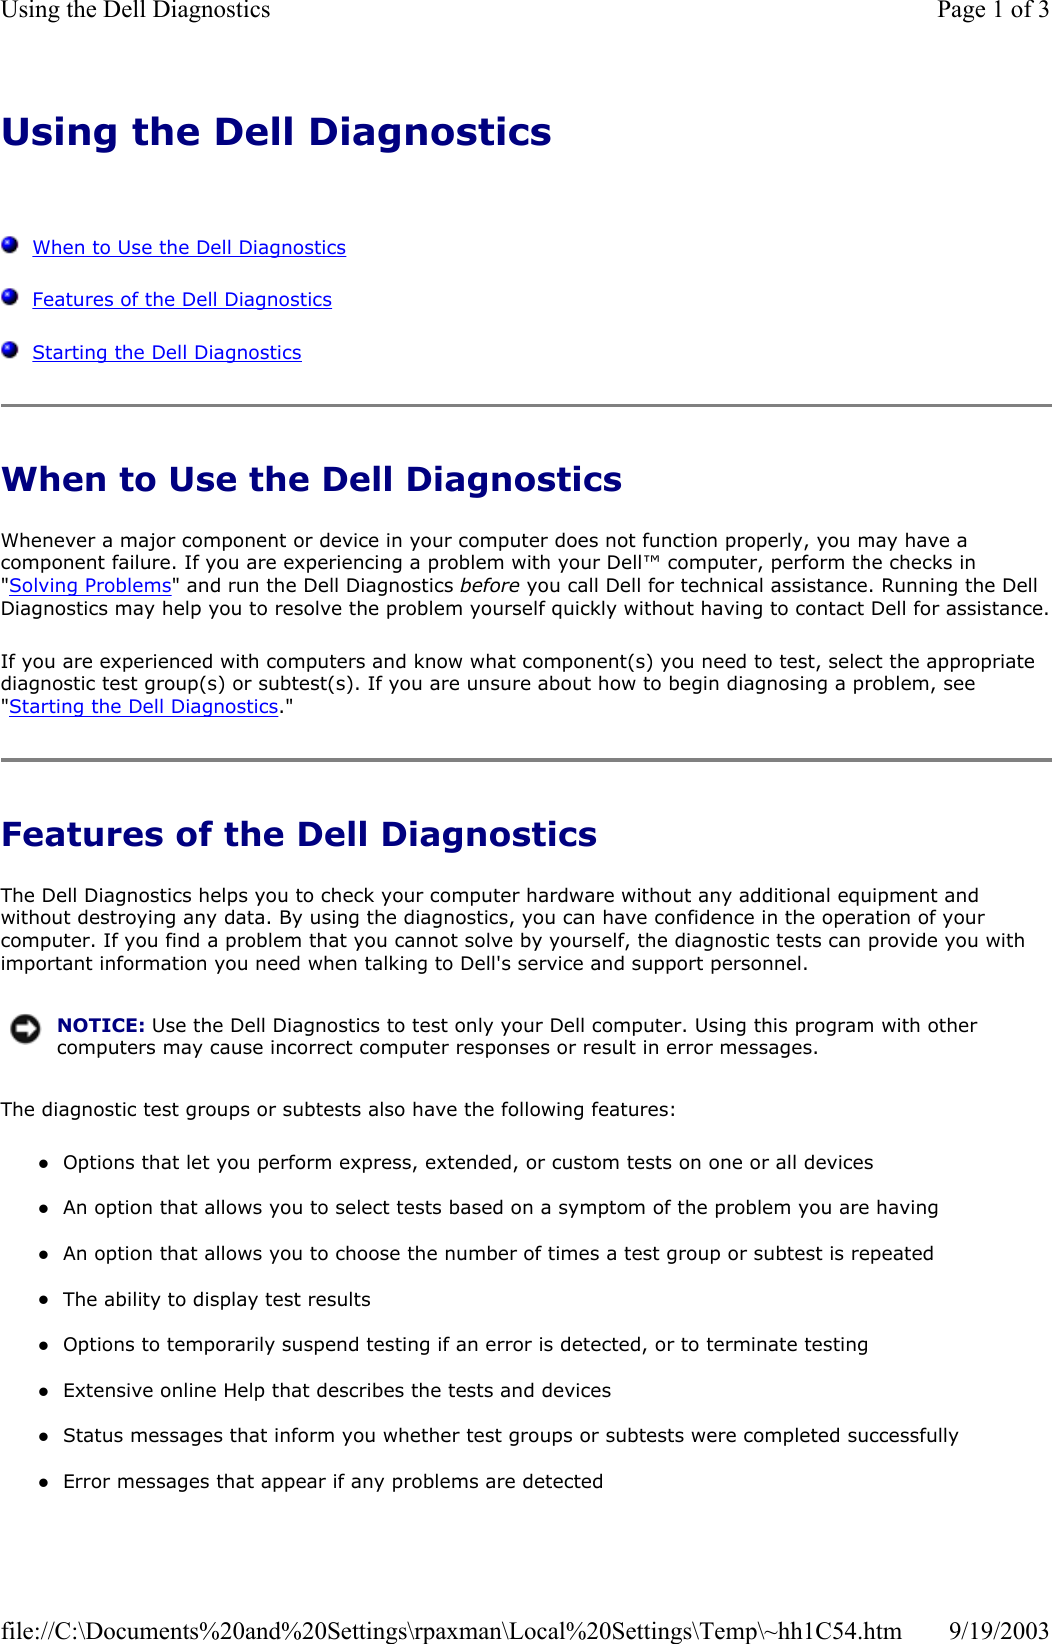 Using the Dell Diagnostics      When to Use the Dell Diagnostics   Features of the Dell Diagnostics   Starting the Dell Diagnostics When to Use the Dell Diagnostics Whenever a major component or device in your computer does not function properly, you may have a component failure. If you are experiencing a problem with your Dell™ computer, perform the checks in &quot;Solving Problems&quot; and run the Dell Diagnostics before you call Dell for technical assistance. Running the Dell Diagnostics may help you to resolve the problem yourself quickly without having to contact Dell for assistance.If you are experienced with computers and know what component(s) you need to test, select the appropriate diagnostic test group(s) or subtest(s). If you are unsure about how to begin diagnosing a problem, see &quot;Starting the Dell Diagnostics.&quot; Features of the Dell Diagnostics The Dell Diagnostics helps you to check your computer hardware without any additional equipment and without destroying any data. By using the diagnostics, you can have confidence in the operation of your computer. If you find a problem that you cannot solve by yourself, the diagnostic tests can provide you with important information you need when talking to Dell&apos;s service and support personnel. The diagnostic test groups or subtests also have the following features: zOptions that let you perform express, extended, or custom tests on one or all devices  zAn option that allows you to select tests based on a symptom of the problem you are having  zAn option that allows you to choose the number of times a test group or subtest is repeated  zThe ability to display test results  zOptions to temporarily suspend testing if an error is detected, or to terminate testing  zExtensive online Help that describes the tests and devices  zStatus messages that inform you whether test groups or subtests were completed successfully  zError messages that appear if any problems are detected  NOTICE: Use the Dell Diagnostics to test only your Dell computer. Using this program with other computers may cause incorrect computer responses or result in error messages.Page 1 of 3Using the Dell Diagnostics9/19/2003file://C:\Documents%20and%20Settings\rpaxman\Local%20Settings\Temp\~hh1C54.htm